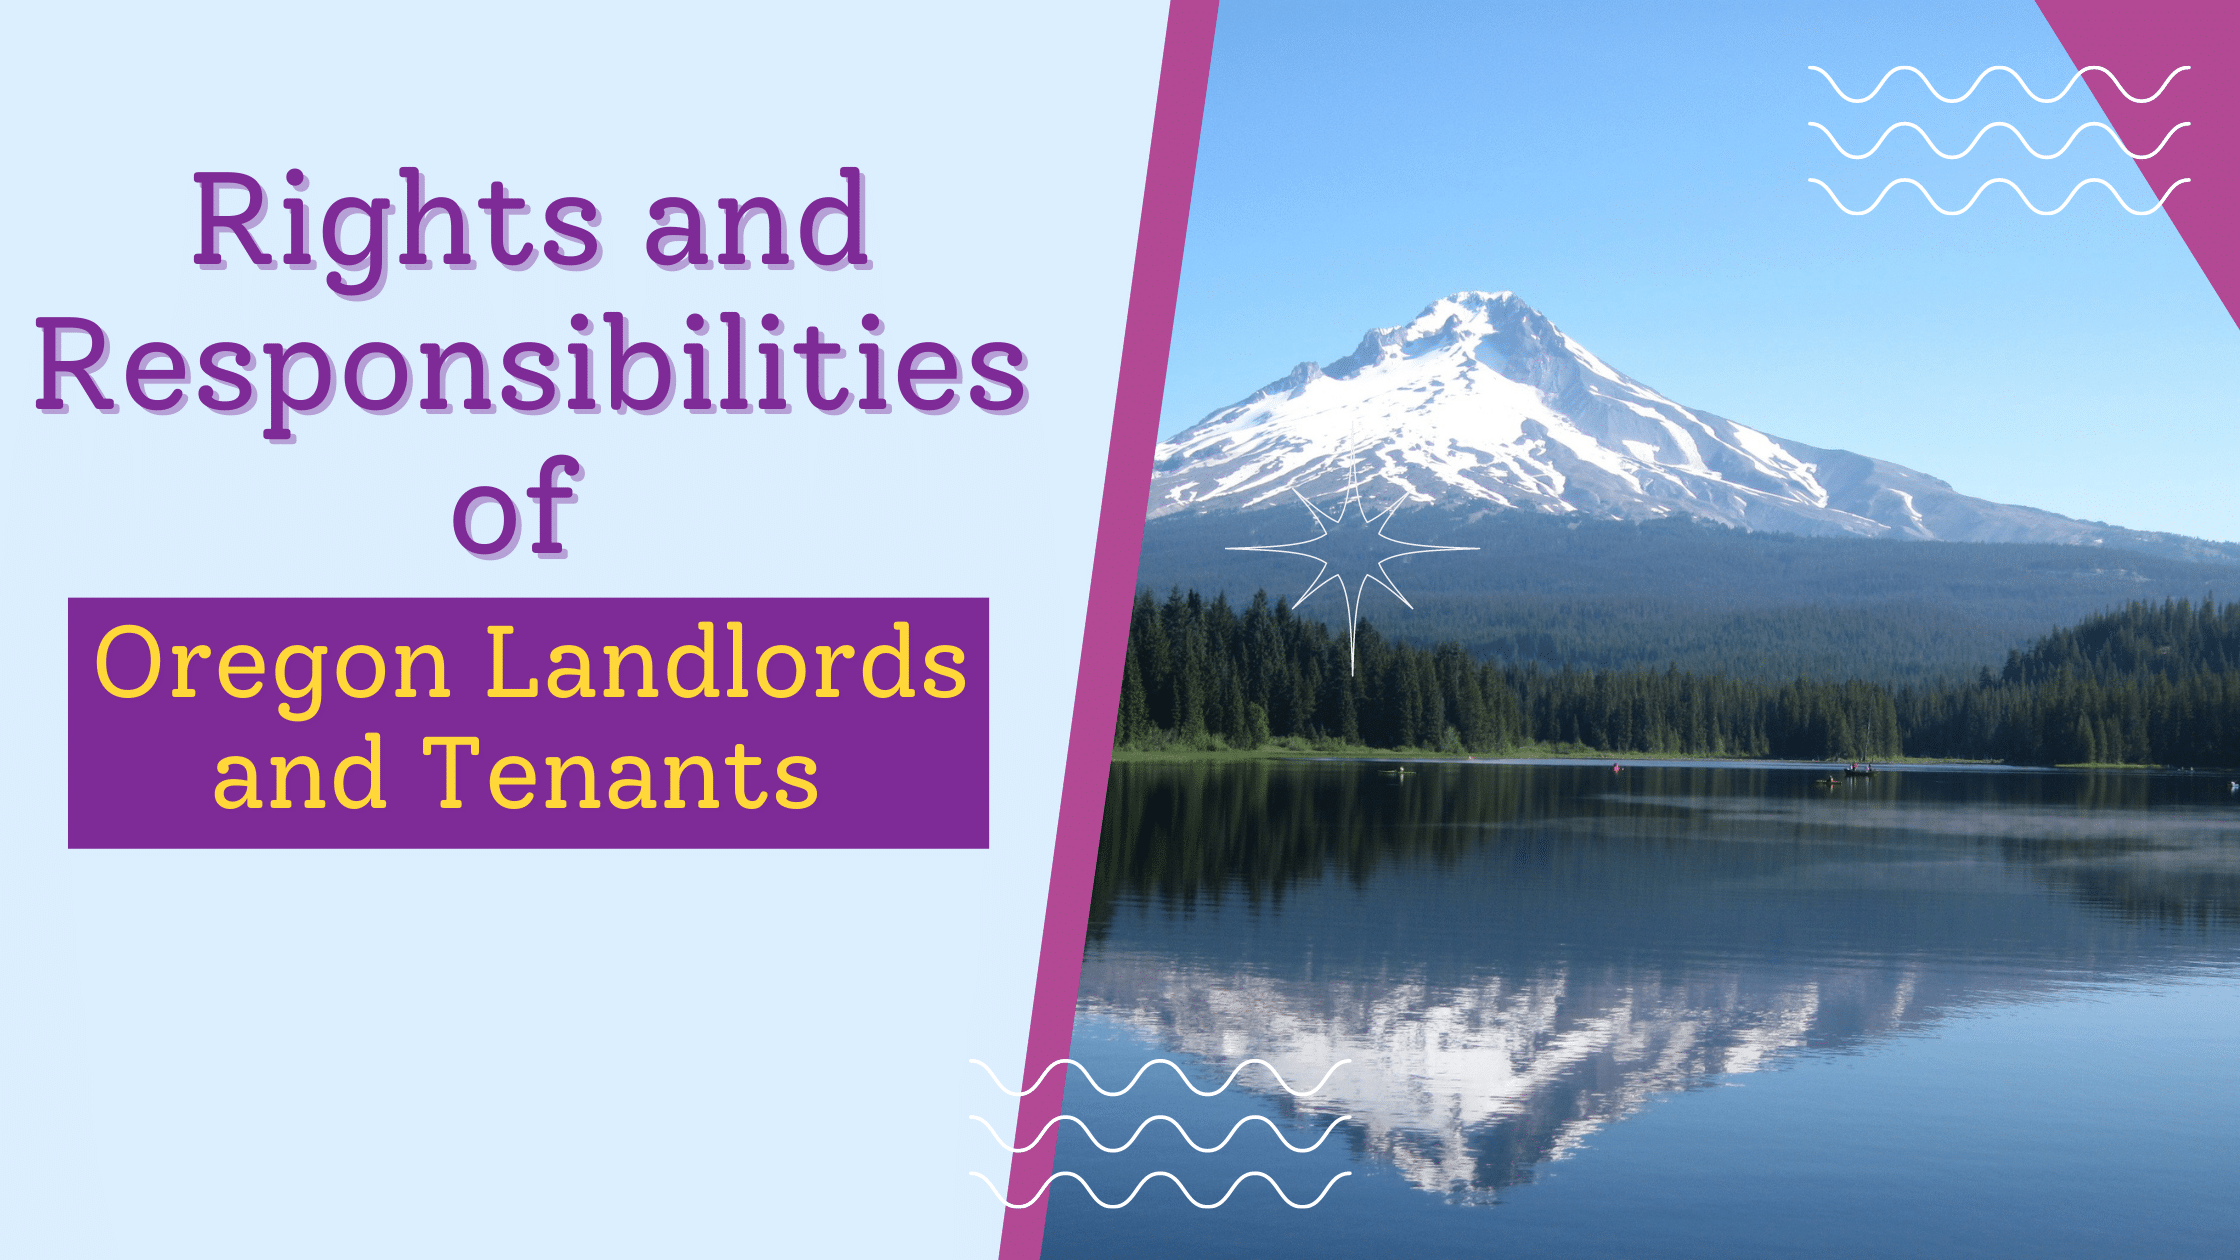 Rights and Responsibilities of Oregon Landlords and Tenants